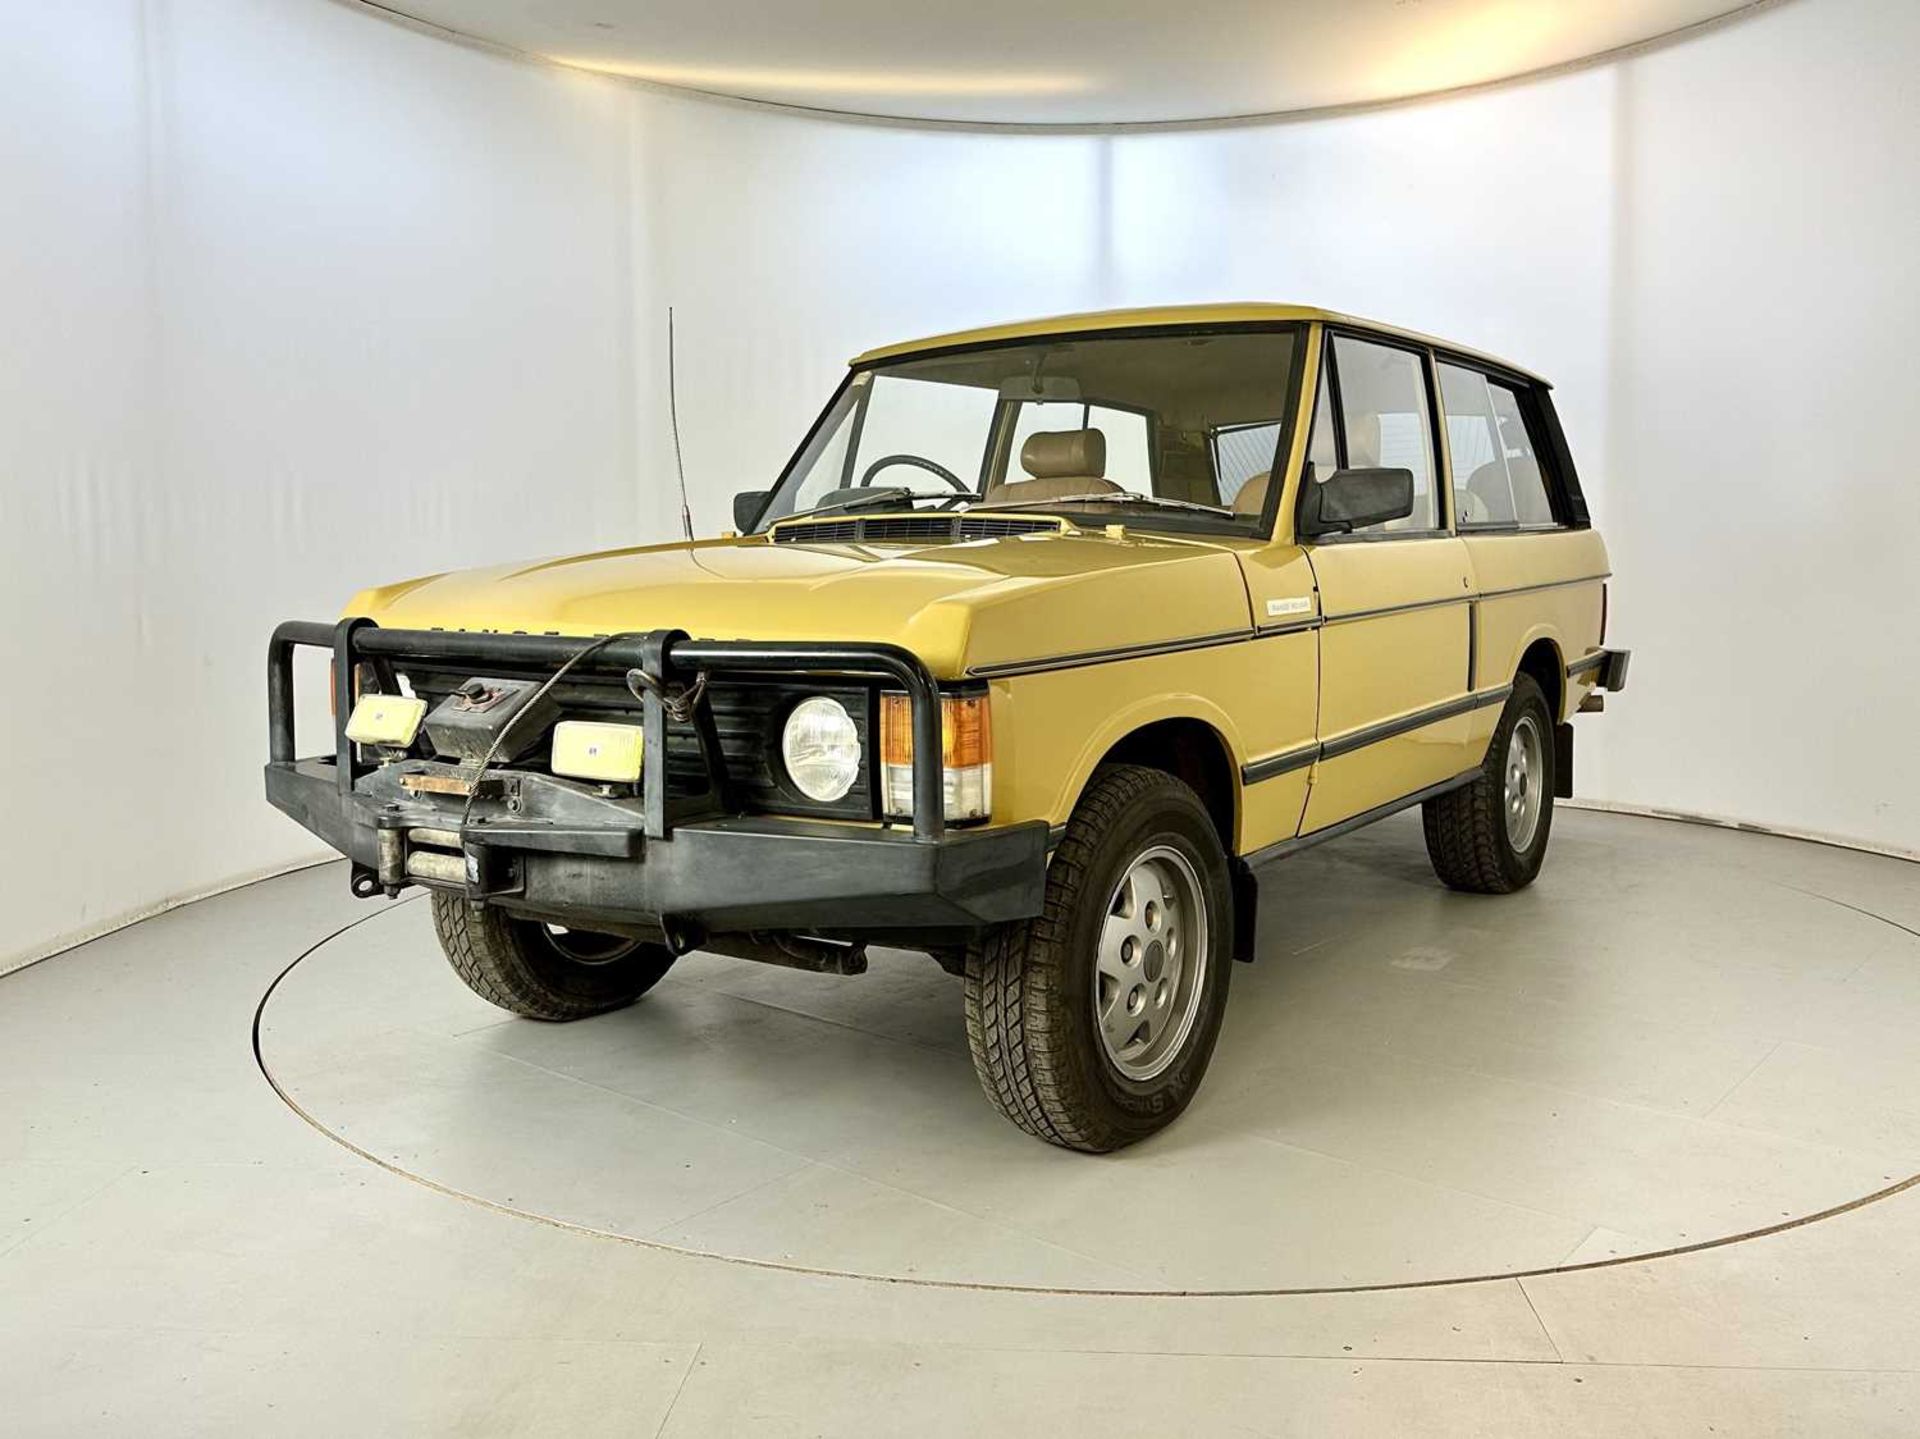 1974 Land Rover Range Rover Showing 26,000 miles from new - Image 3 of 29